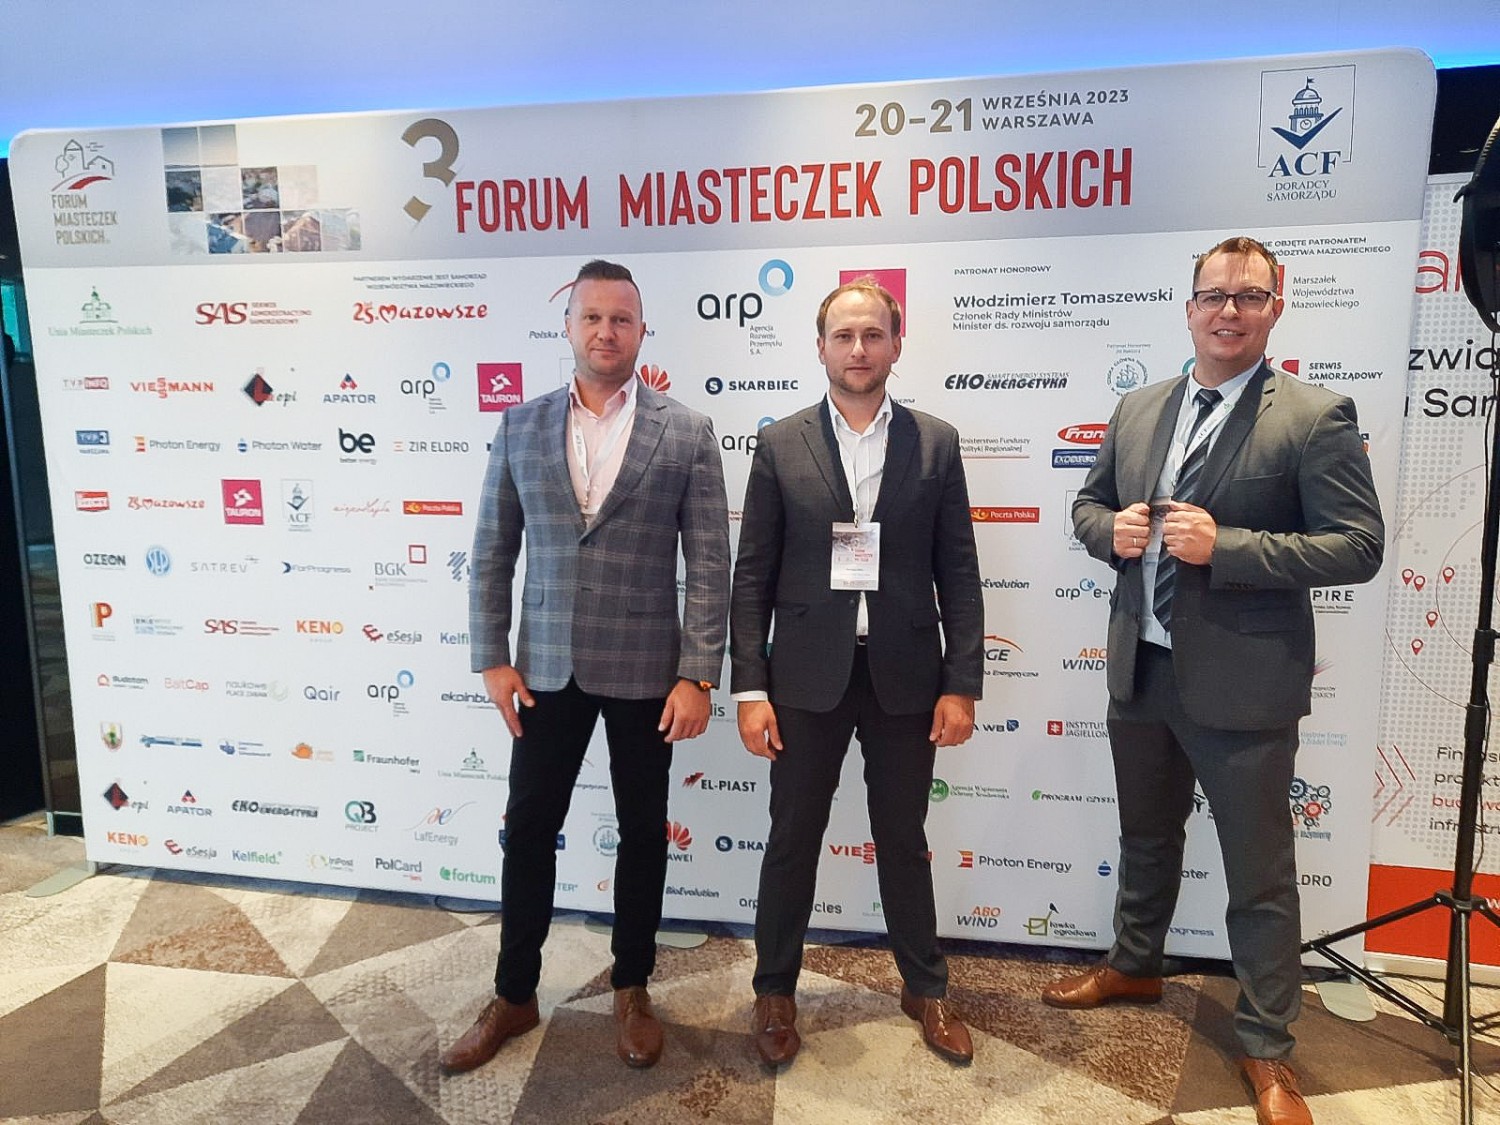 Ekoenergetyka with an Expert Panel at the Polish Towns Forum in Warsaw!